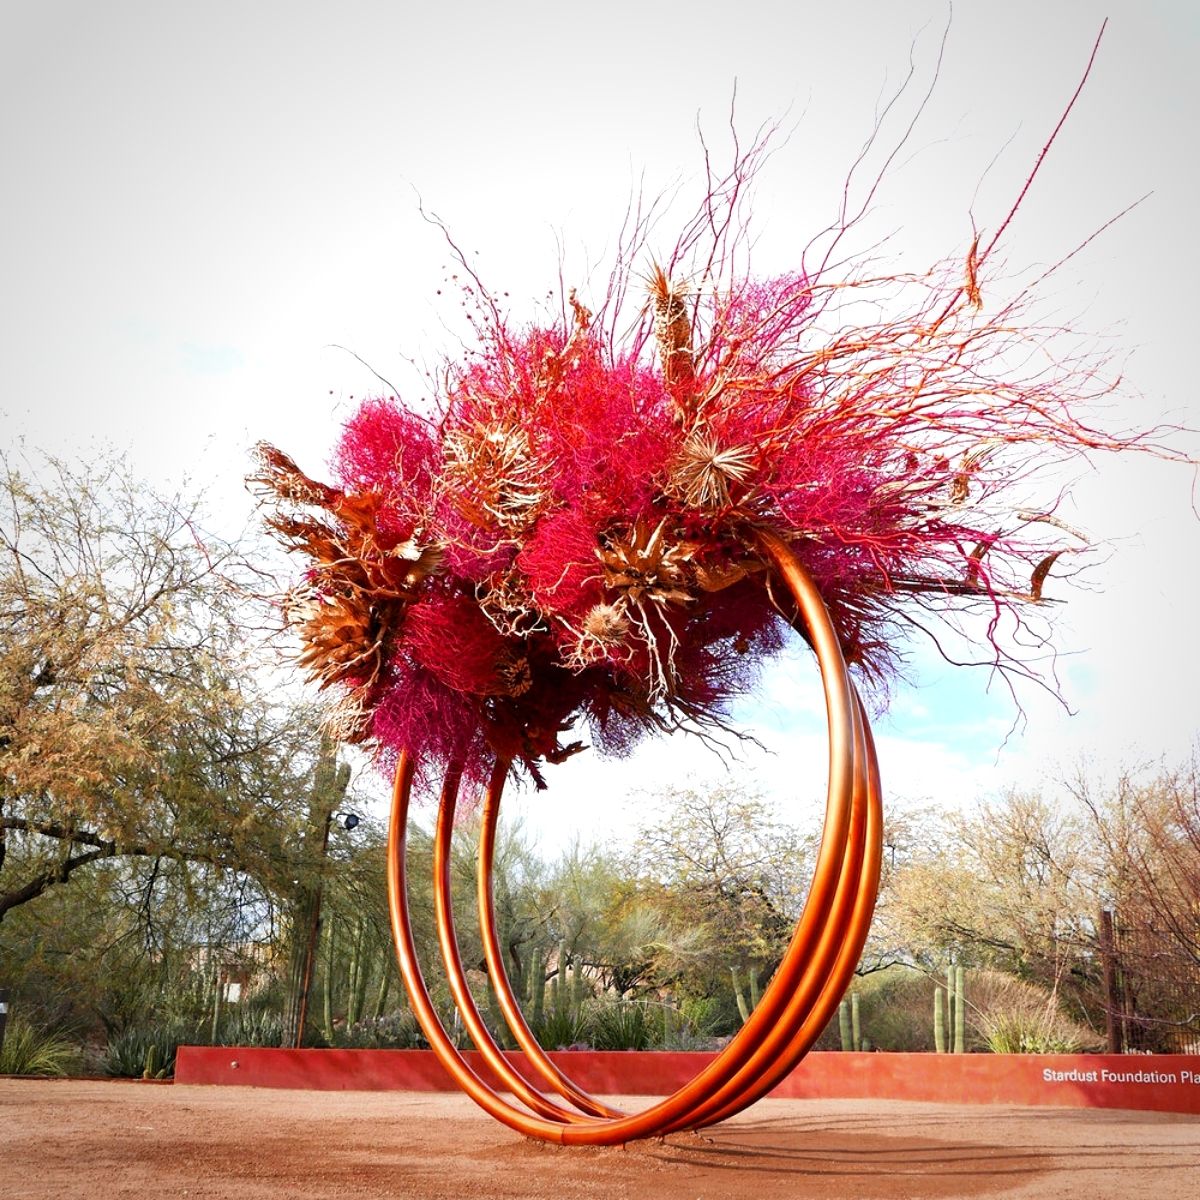 floral-art-installation-inspired-by-the-emotion-and-gesture-of-a-wind-storm-featured